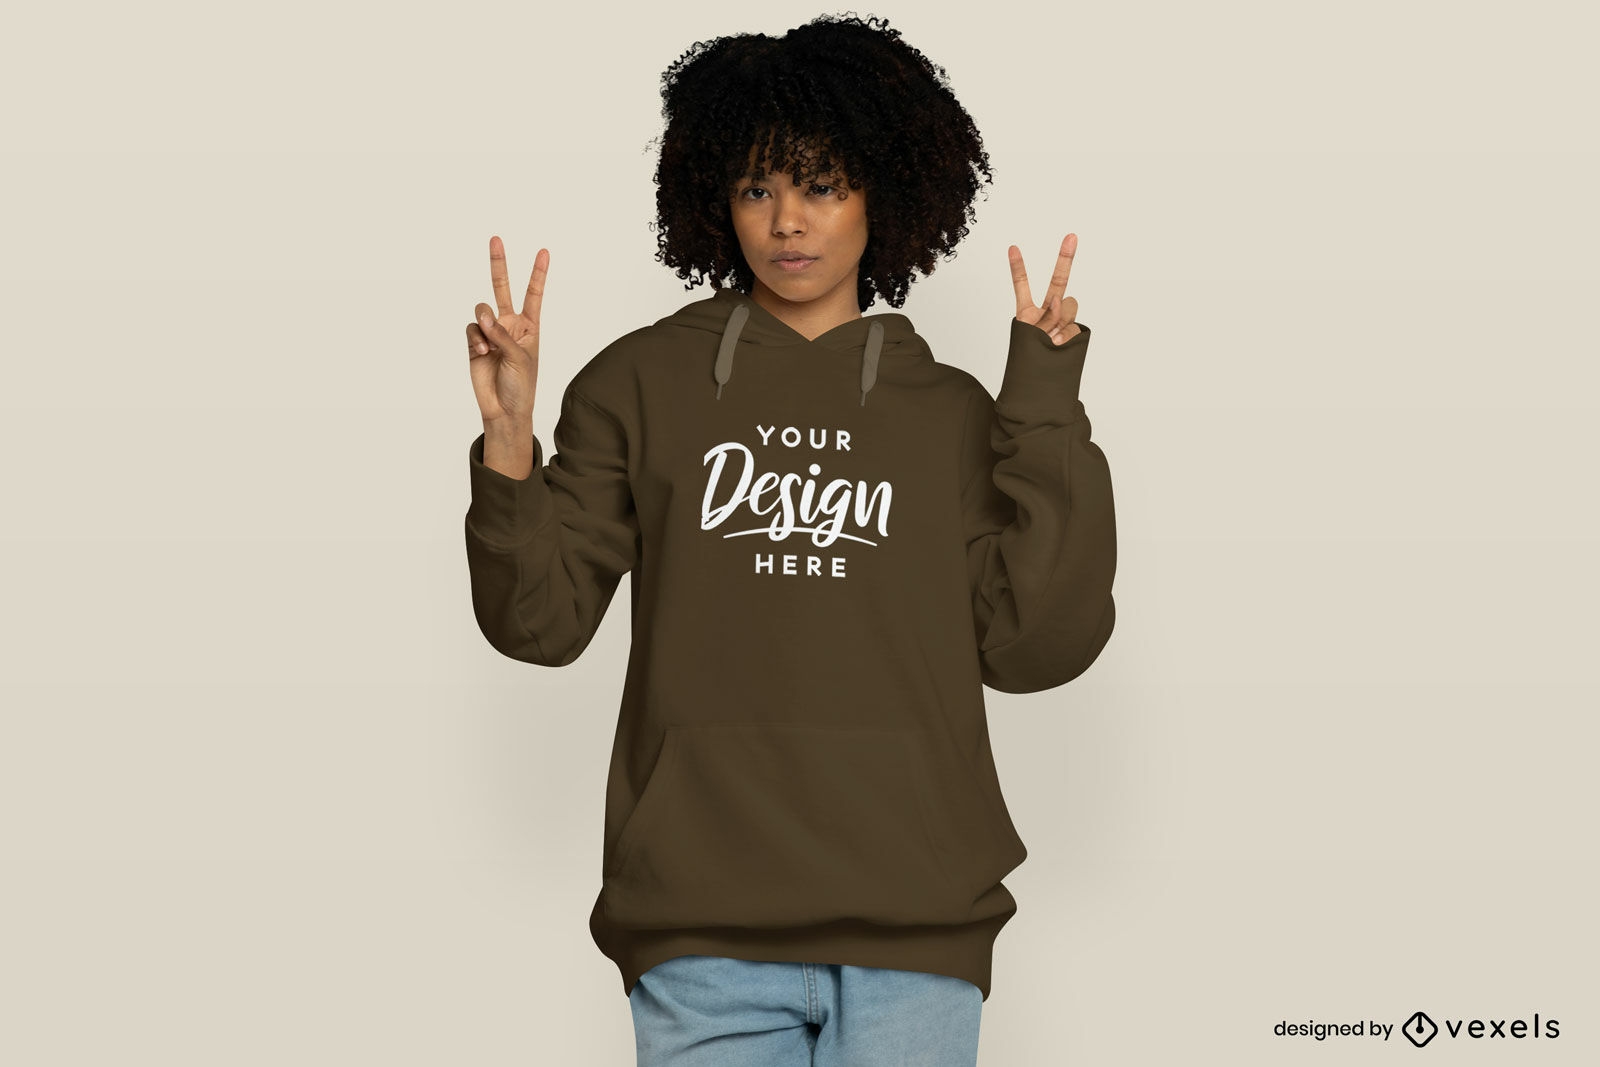 Black girl with curly hair and hoodie mockup